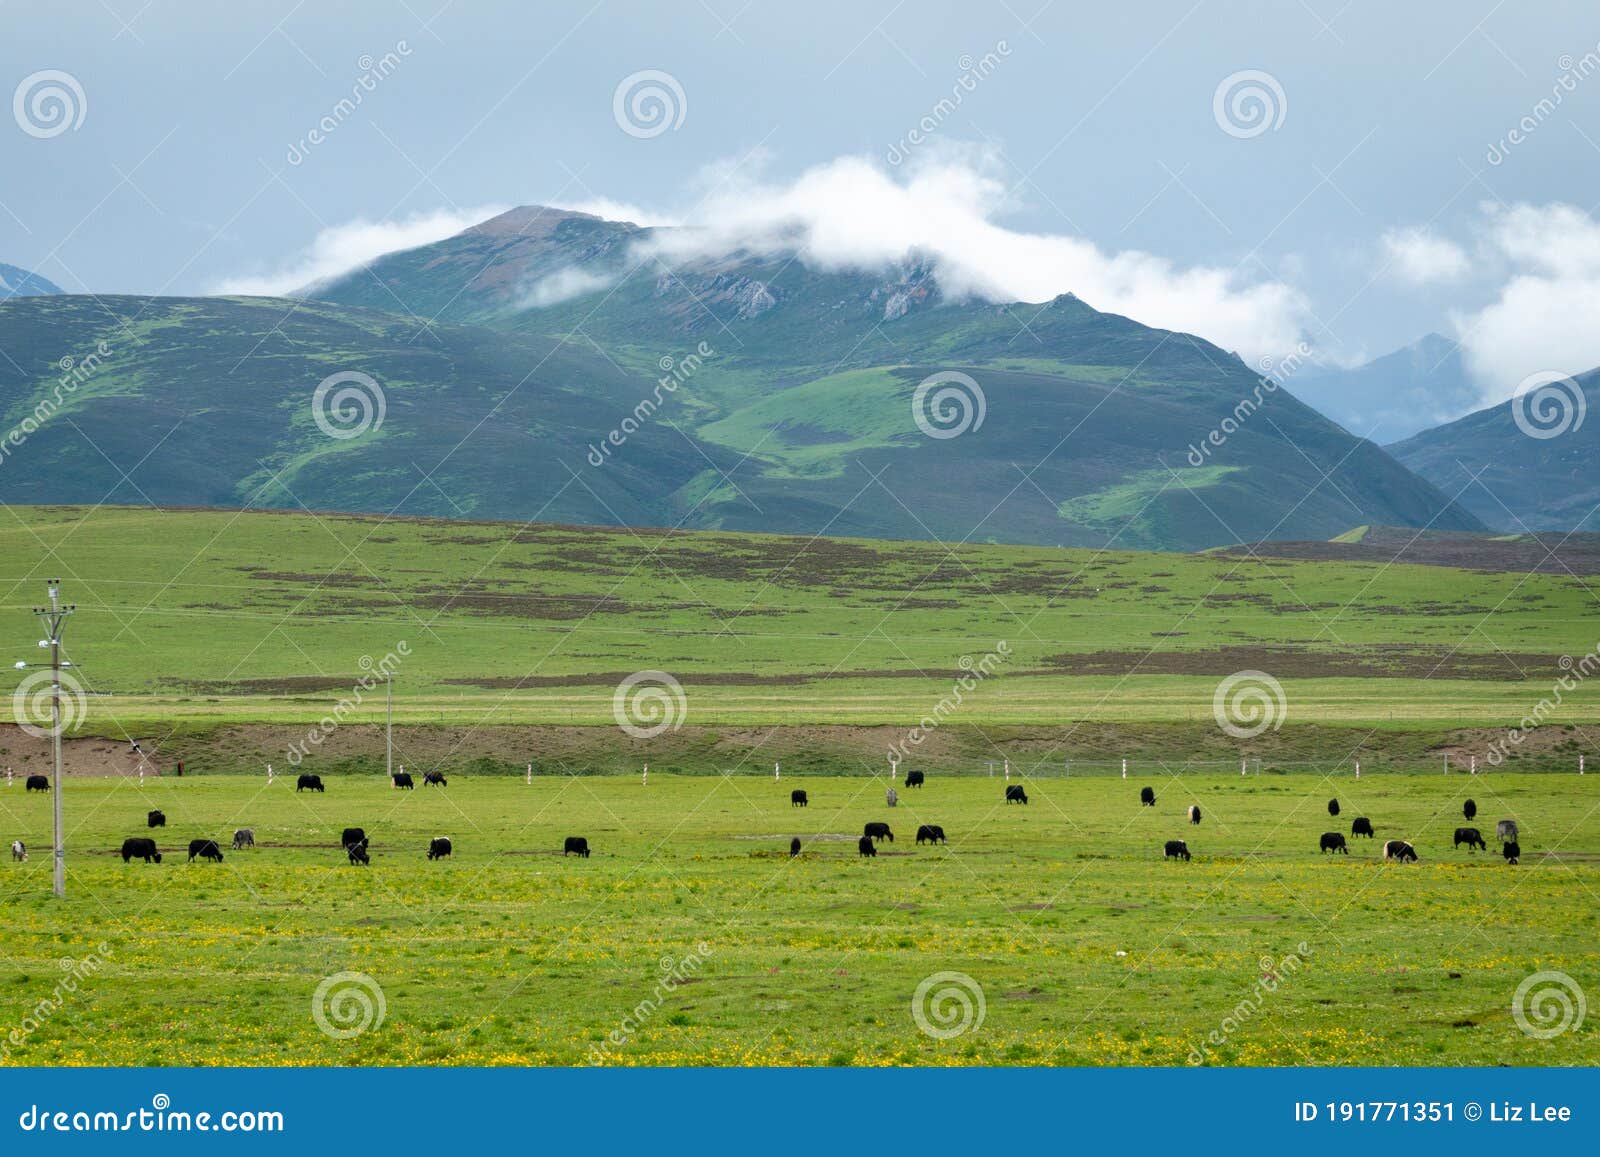 yak grazes on the green pasture at the foot of mountains